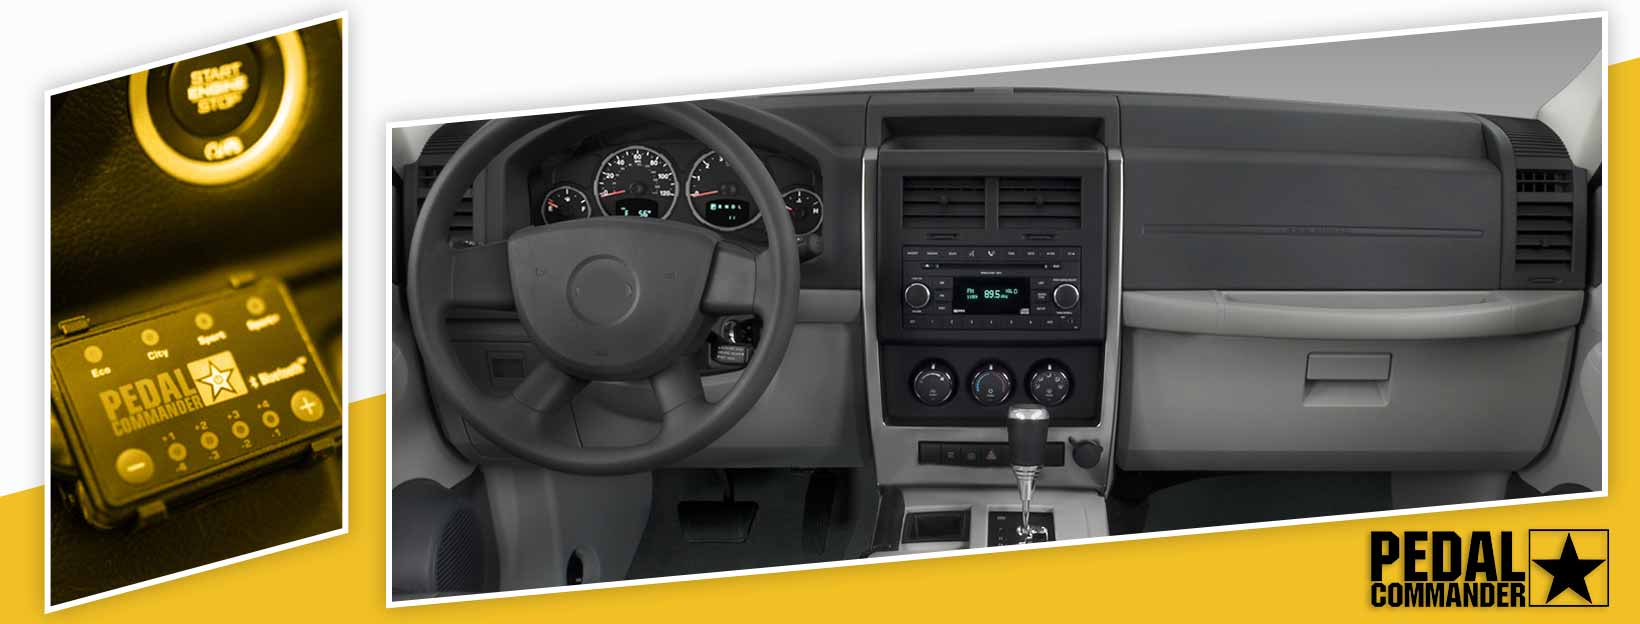 Pedal Commander for Jeep Liberty - interior